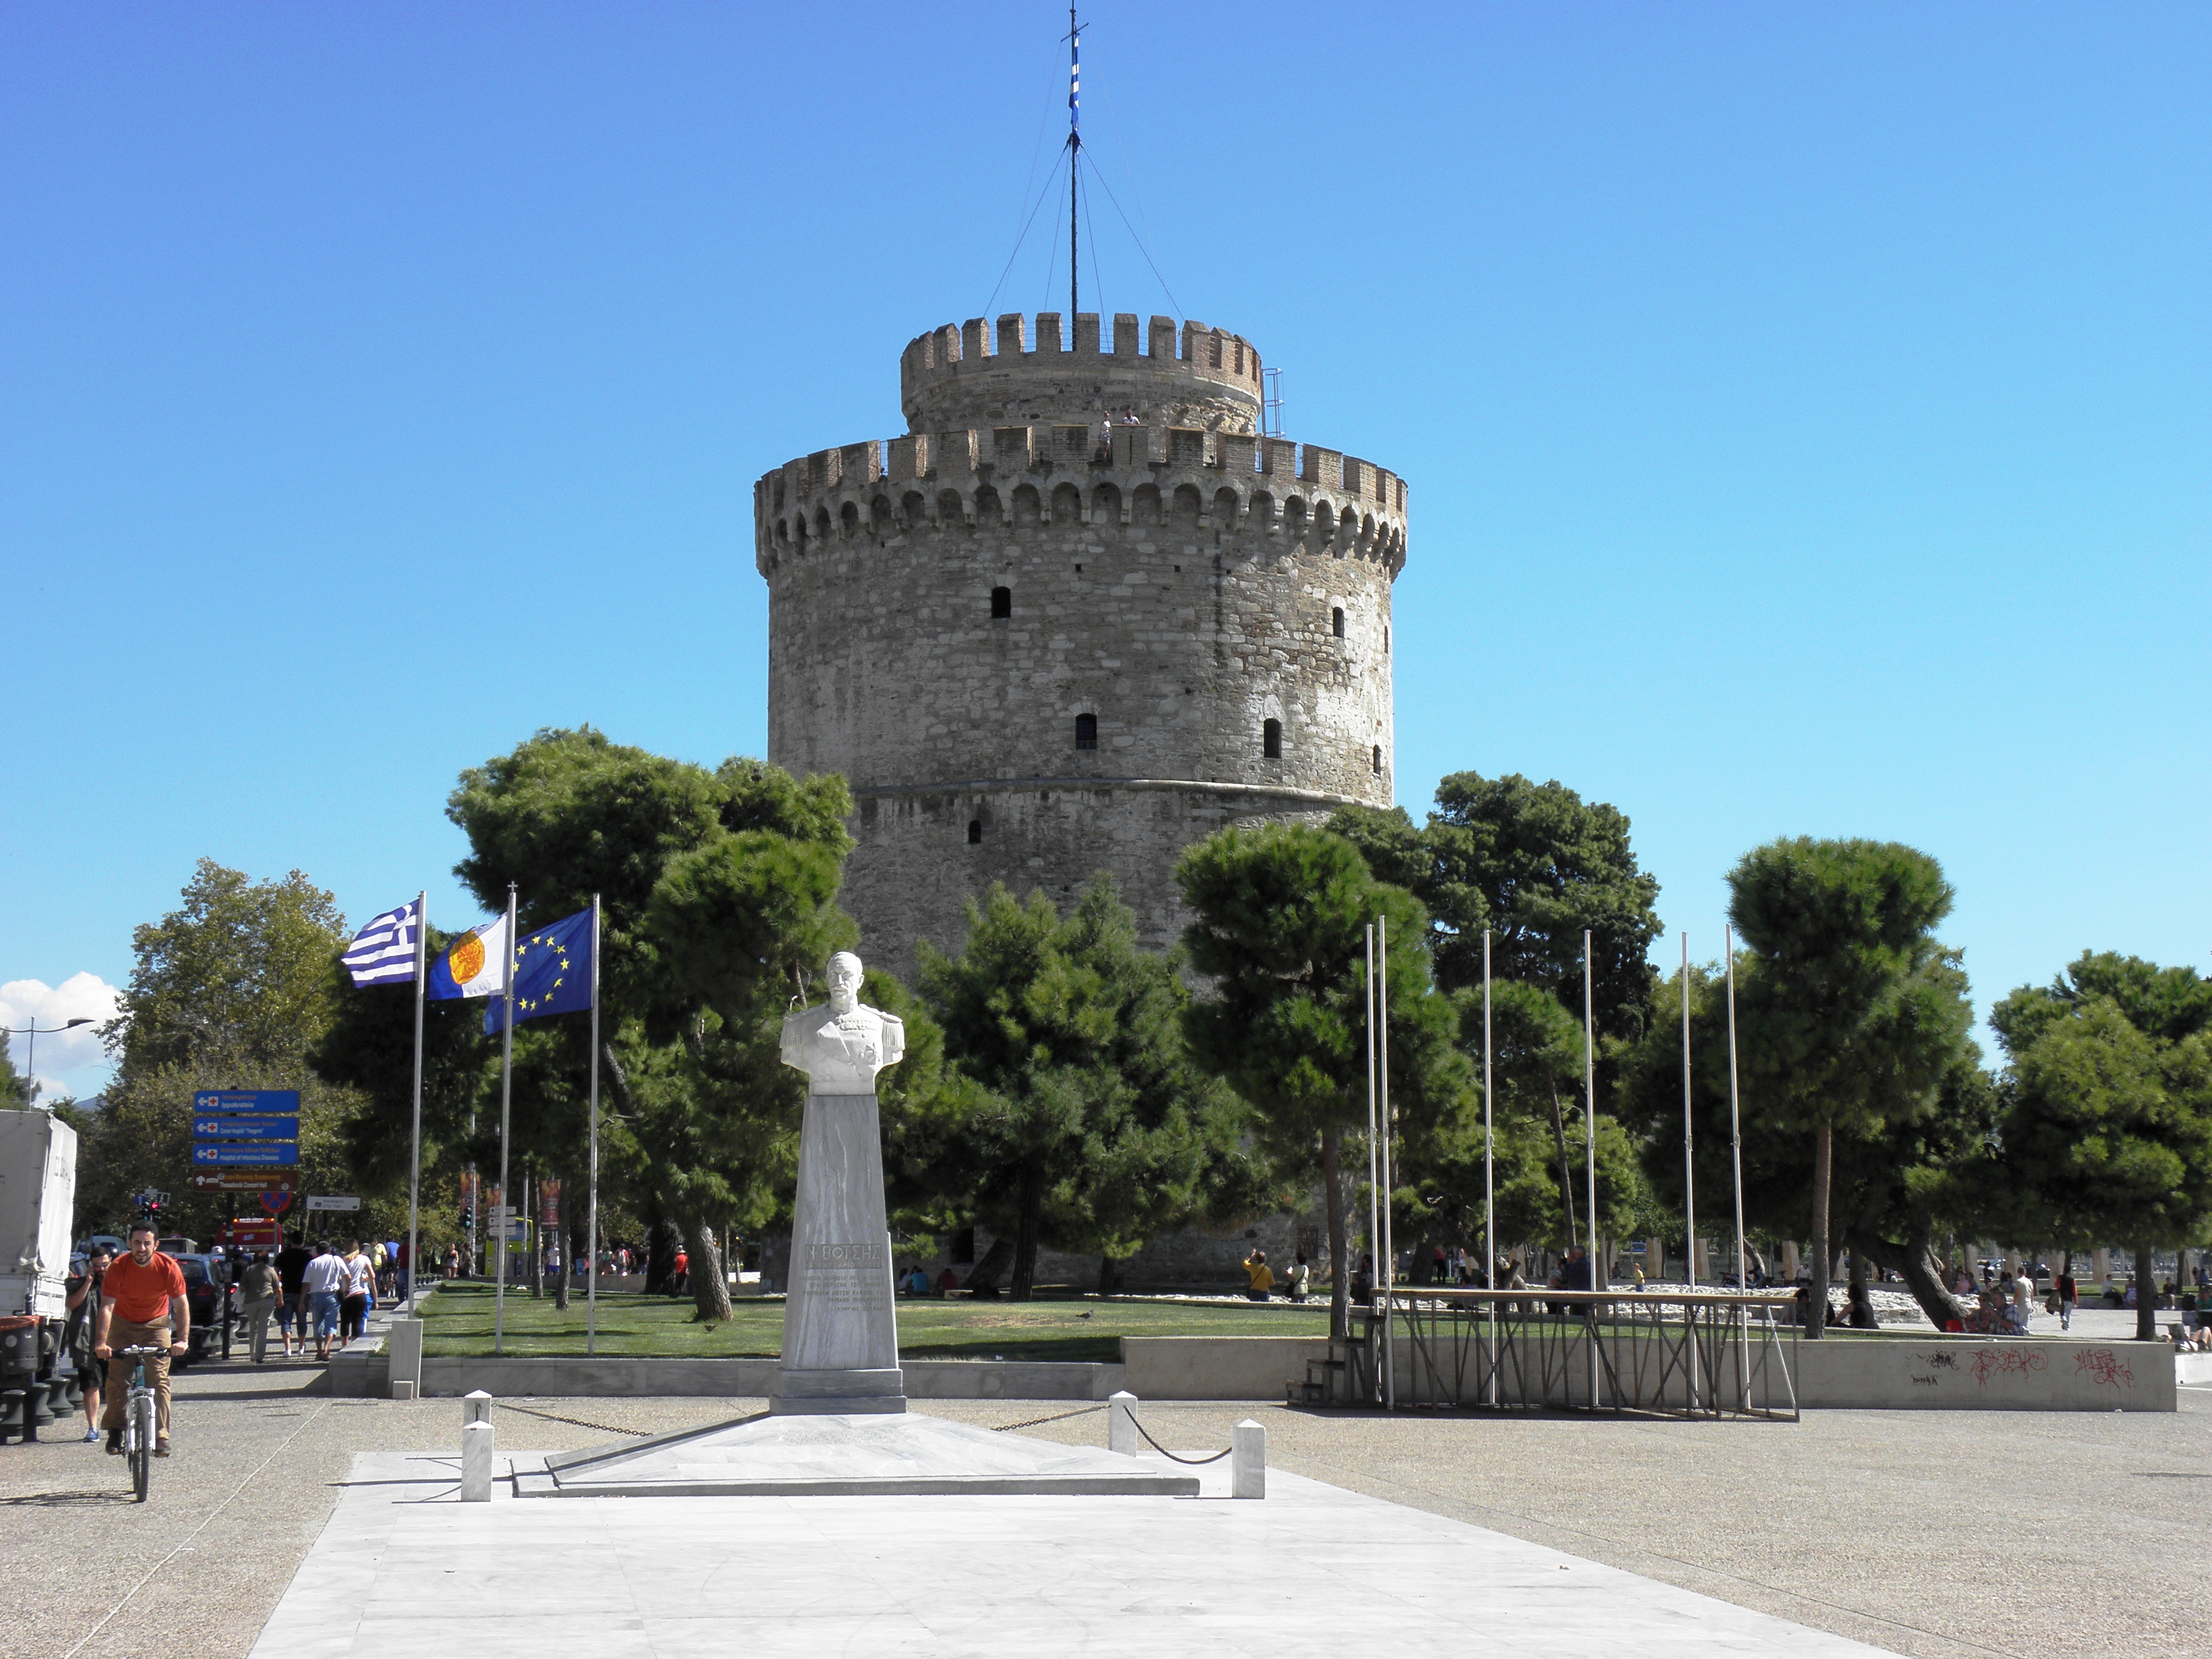 The white tower in thessaloniki photo